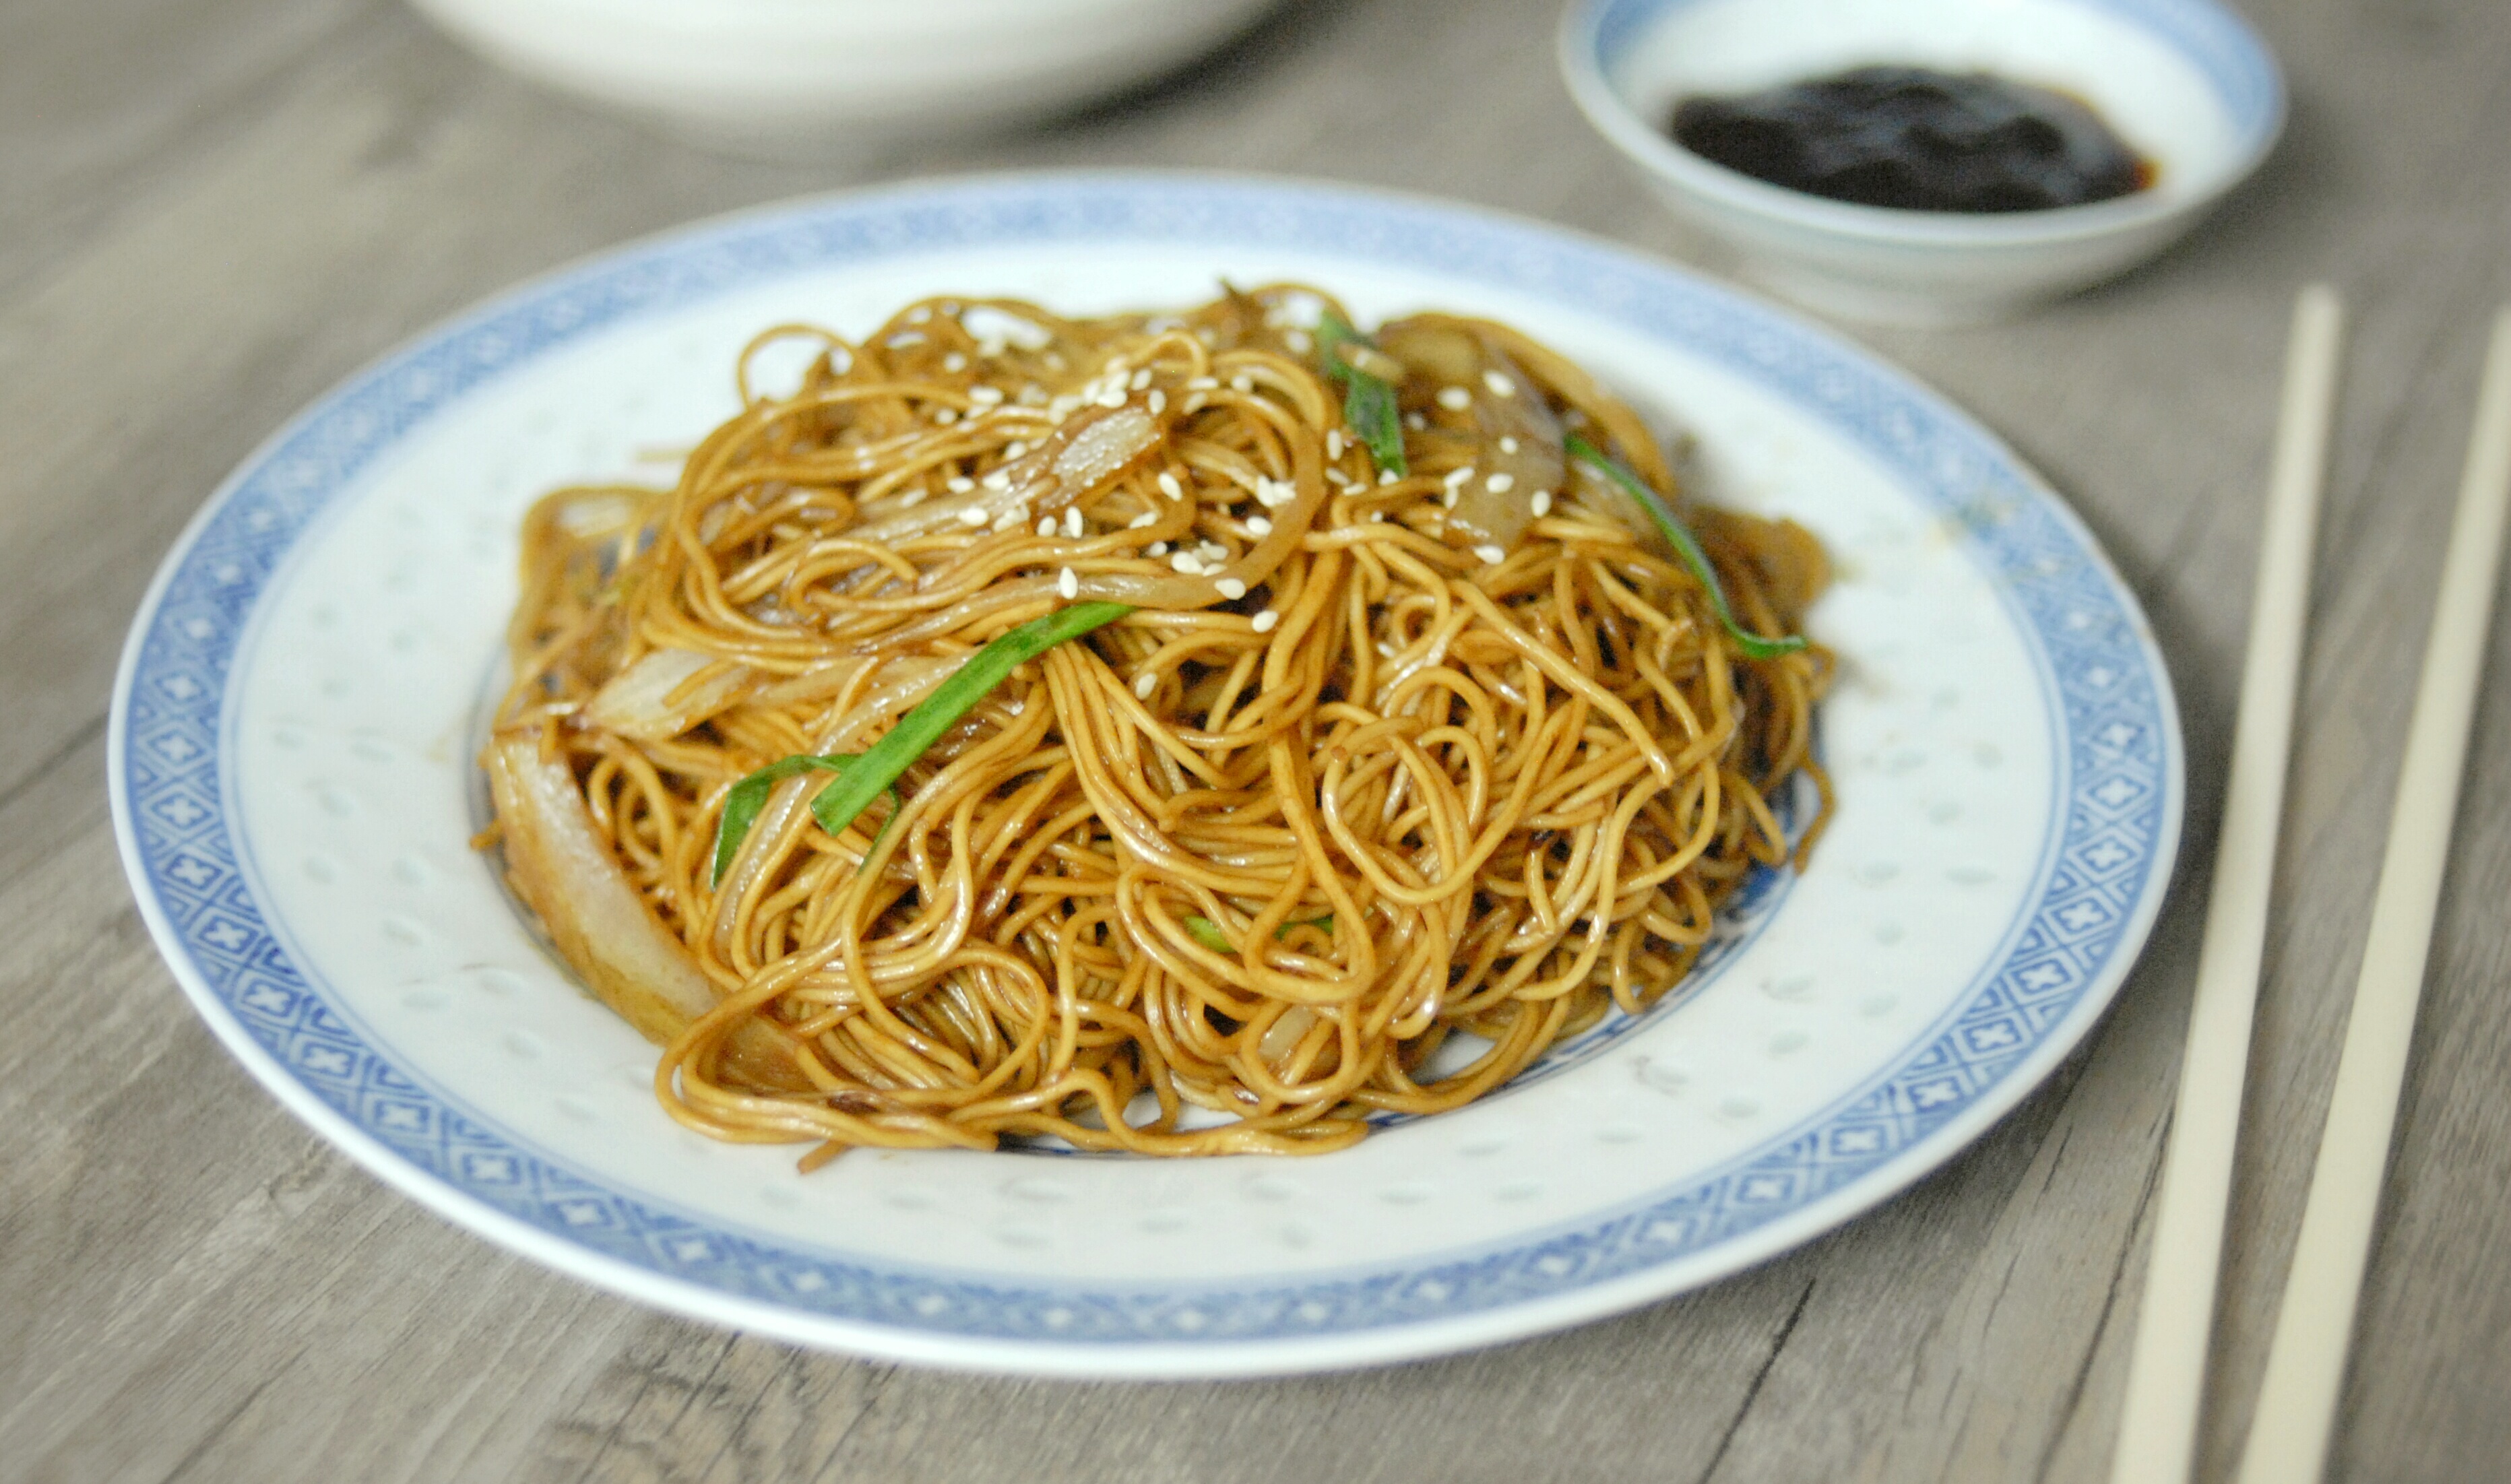 Soy Sauce Pan Fried Noodles (广式豉油皇炒面) - Omnivore's Cookbook